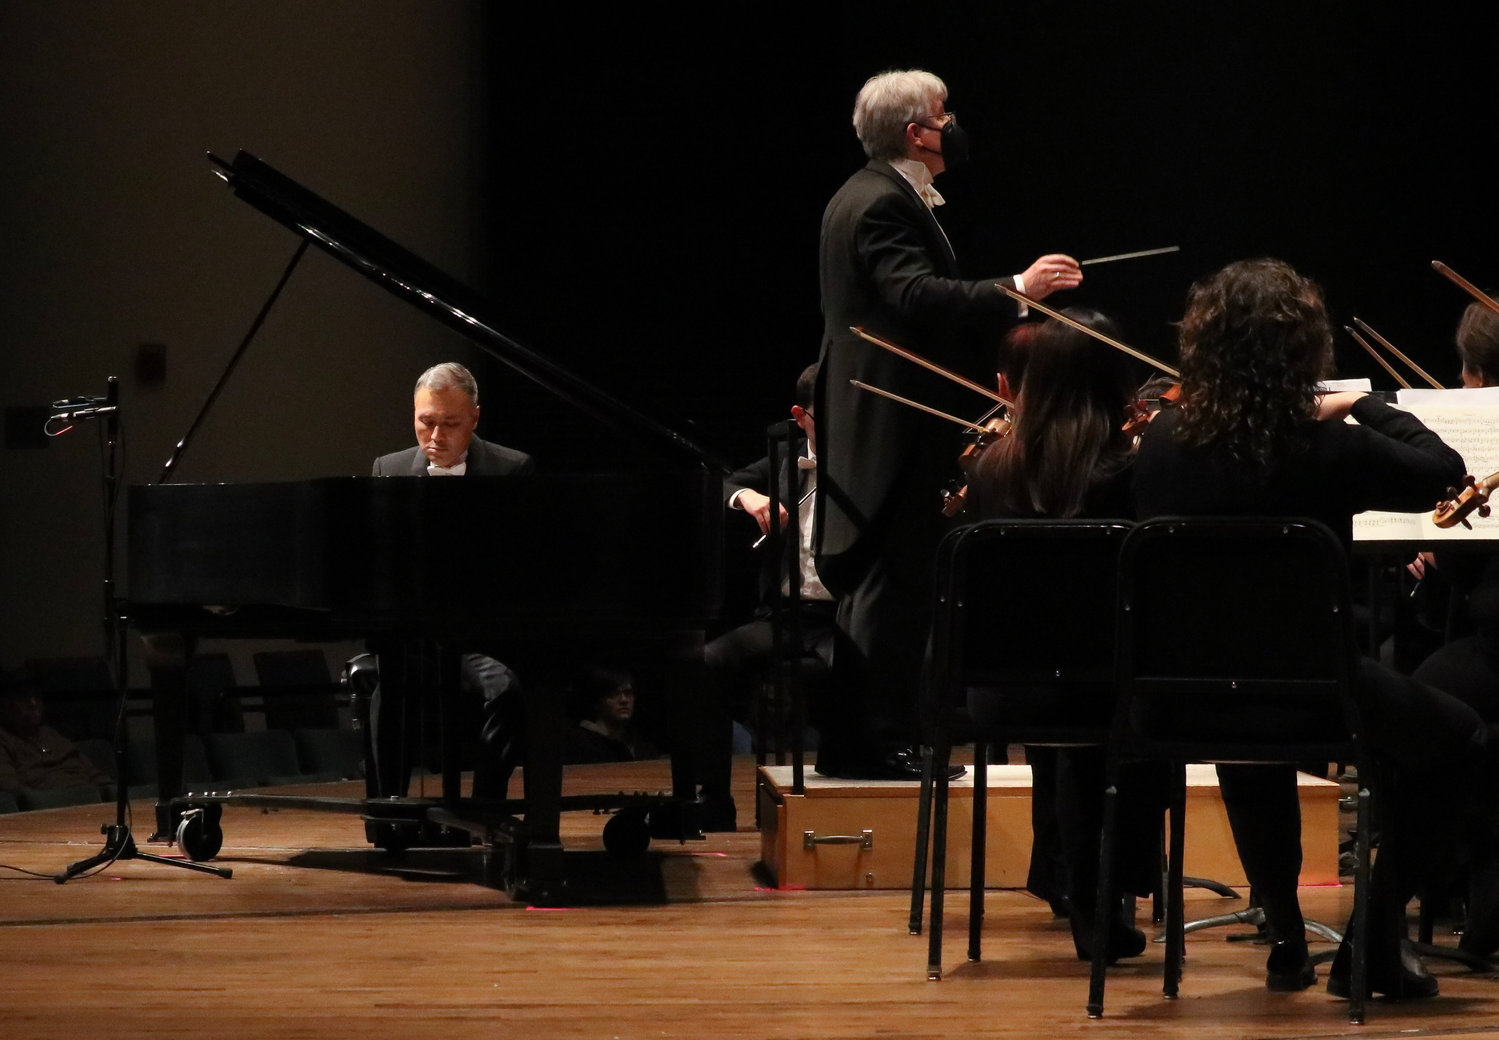 Guest pianist Jon Nakamatsu refrained from showboating and put all the oomph into the music at last week’s Lansing Symphony Orchestra concert.